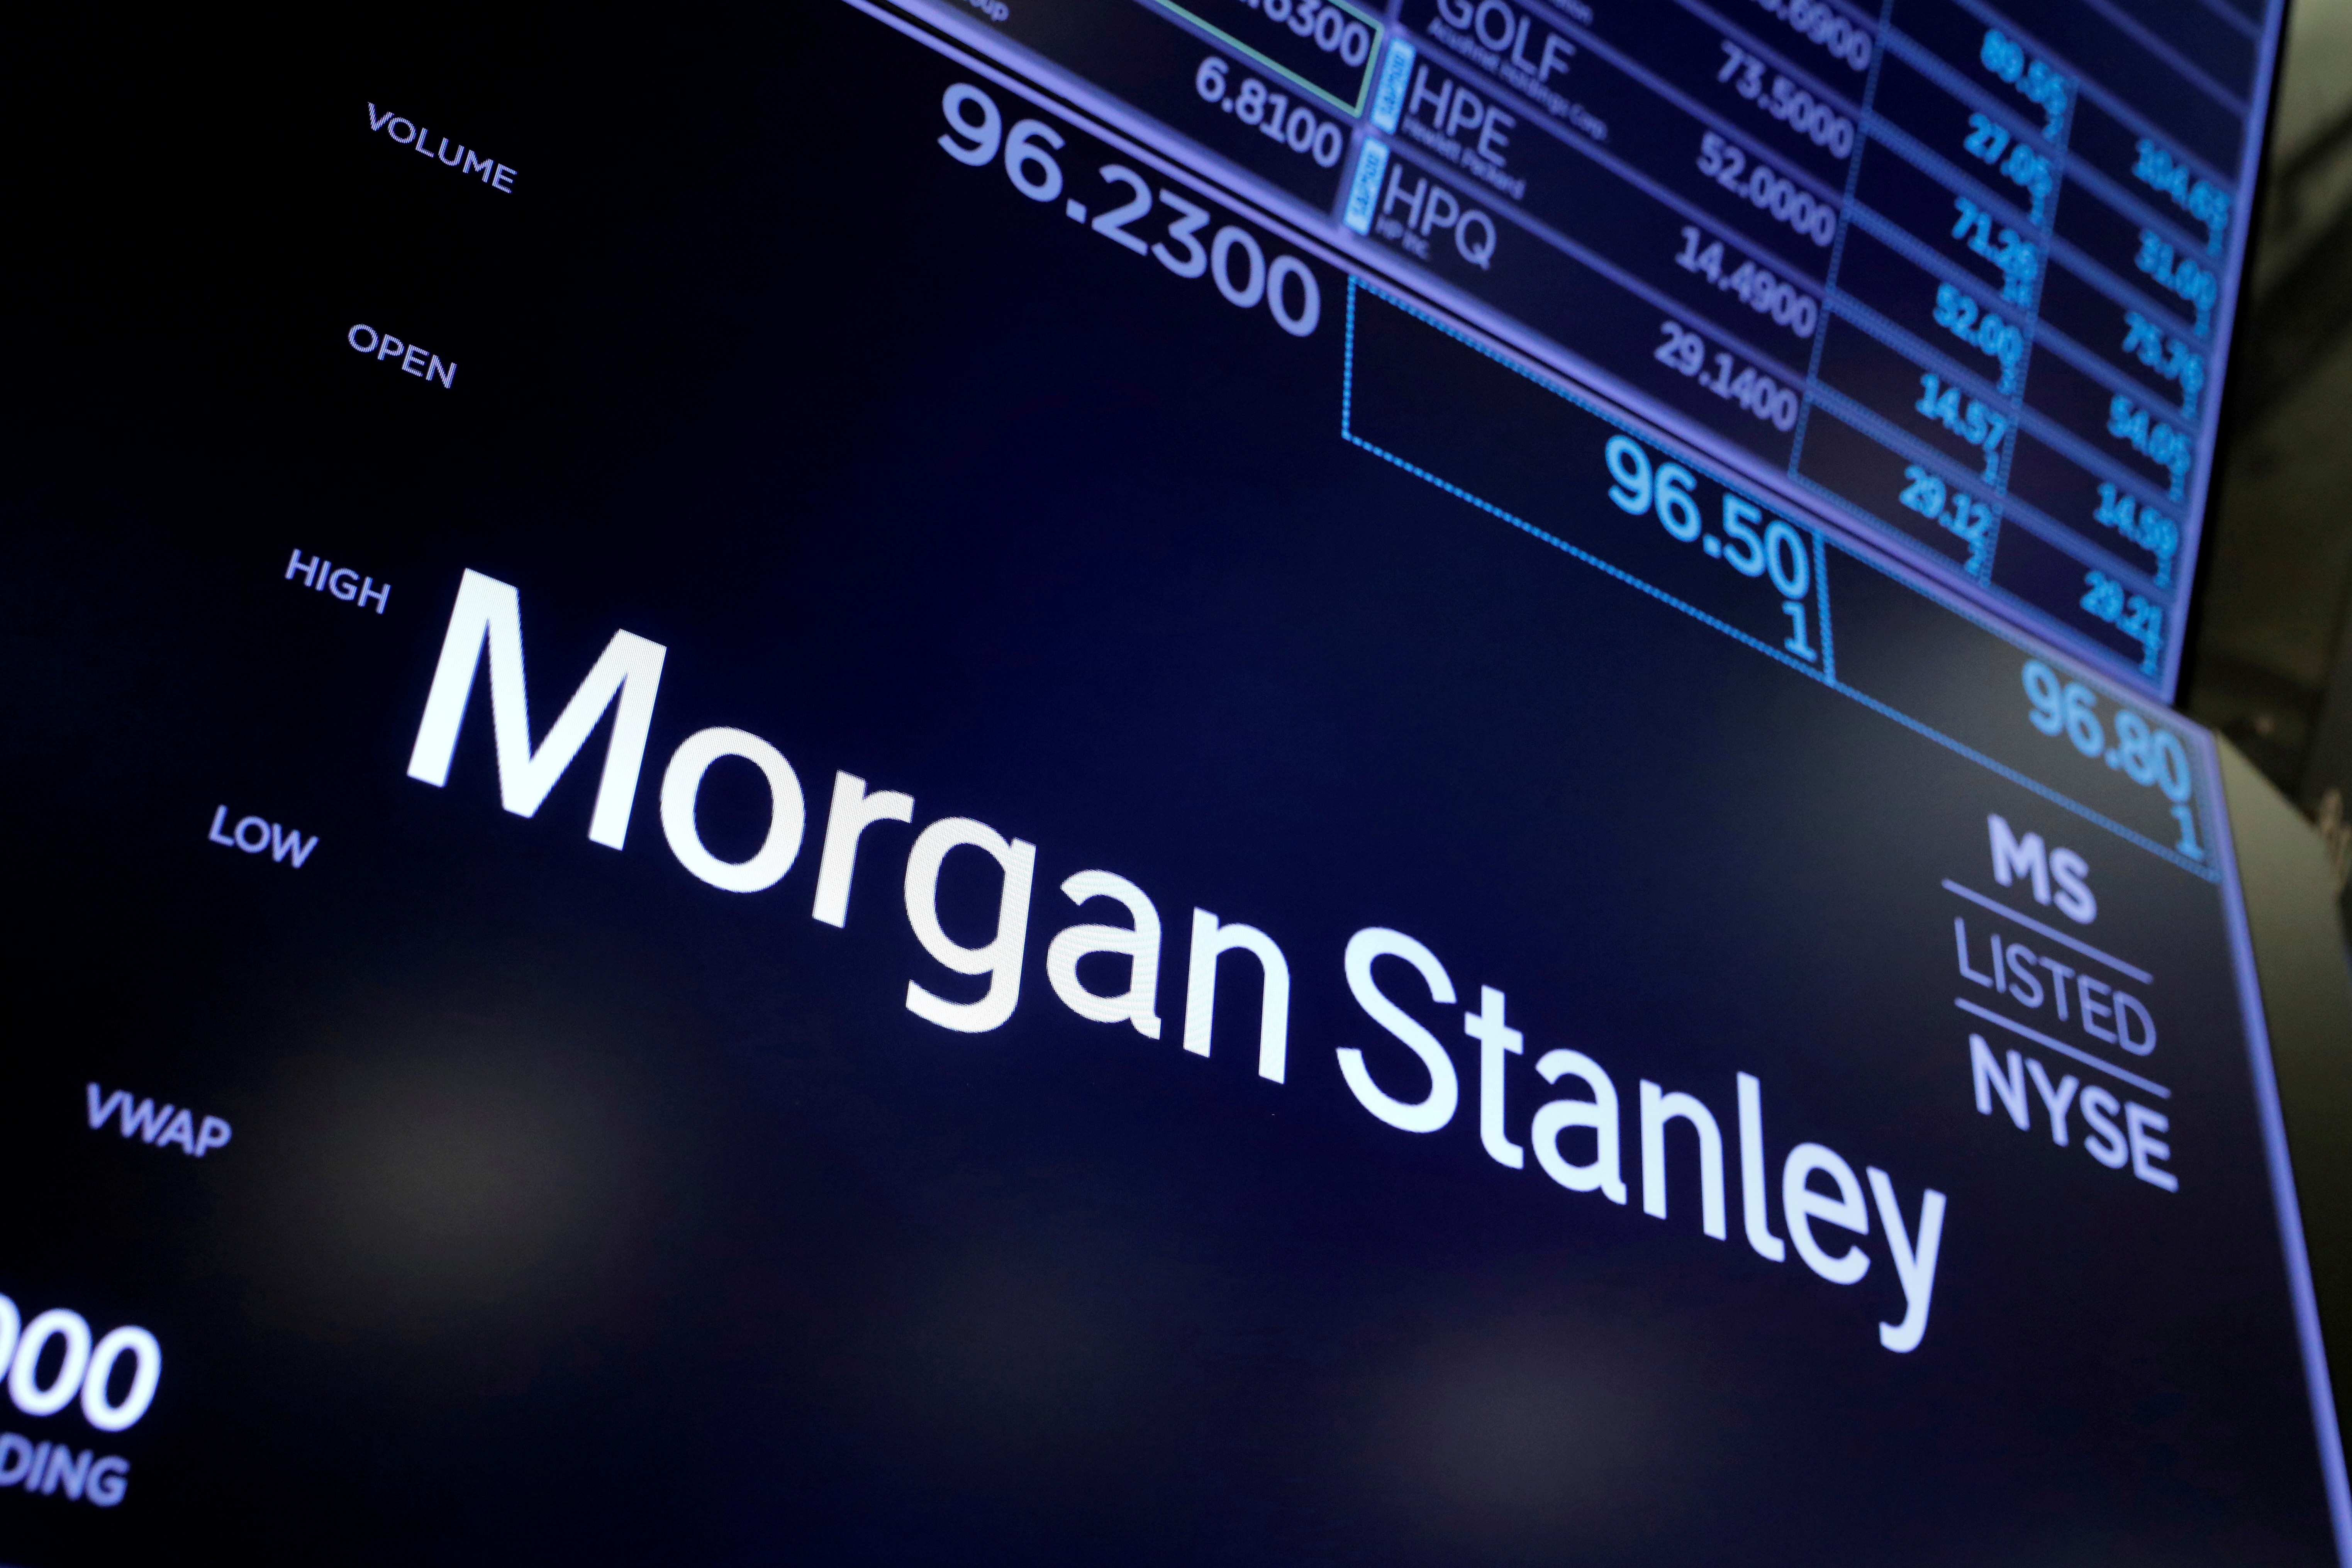 The logo for Morgan Stanley is seen on the trading floor at the New York Stock Exchange (NYSE) in Manhattan, New York City, U.S., August 3, 2021. REUTERS/Andrew Kelly